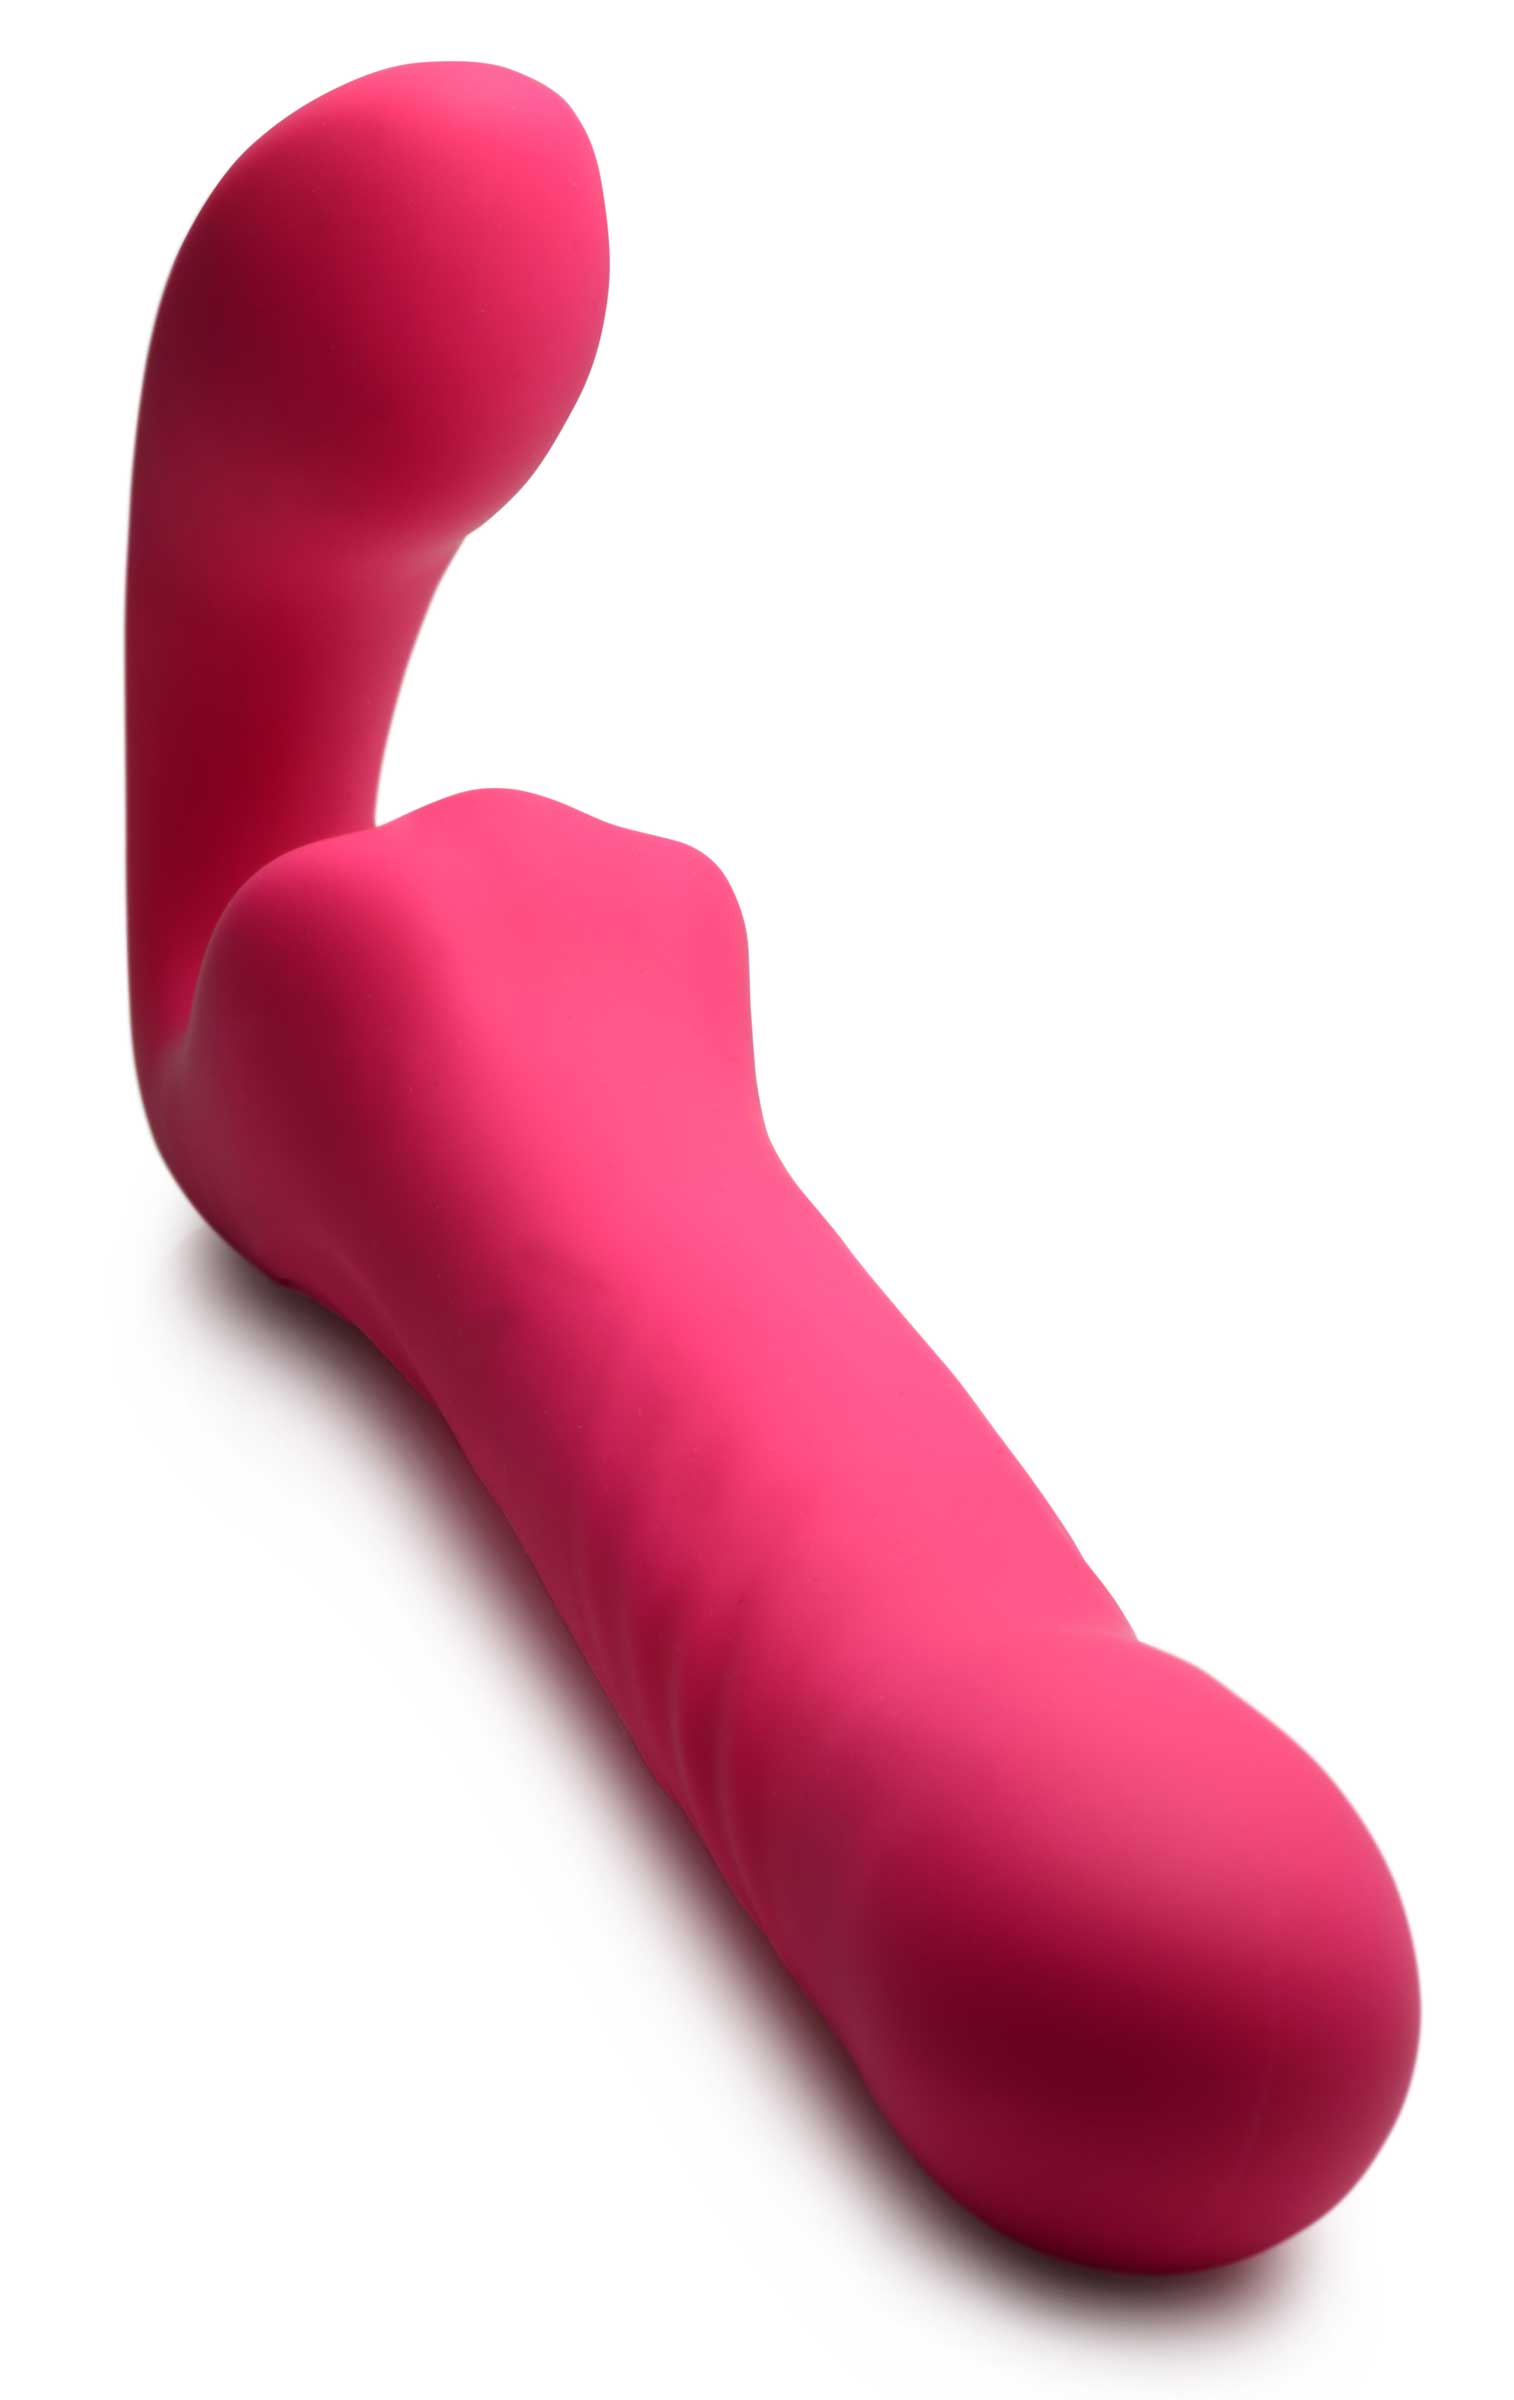 30X Thrusting and Vibrating Strapless Strap-On With Remote Control - UABDSM